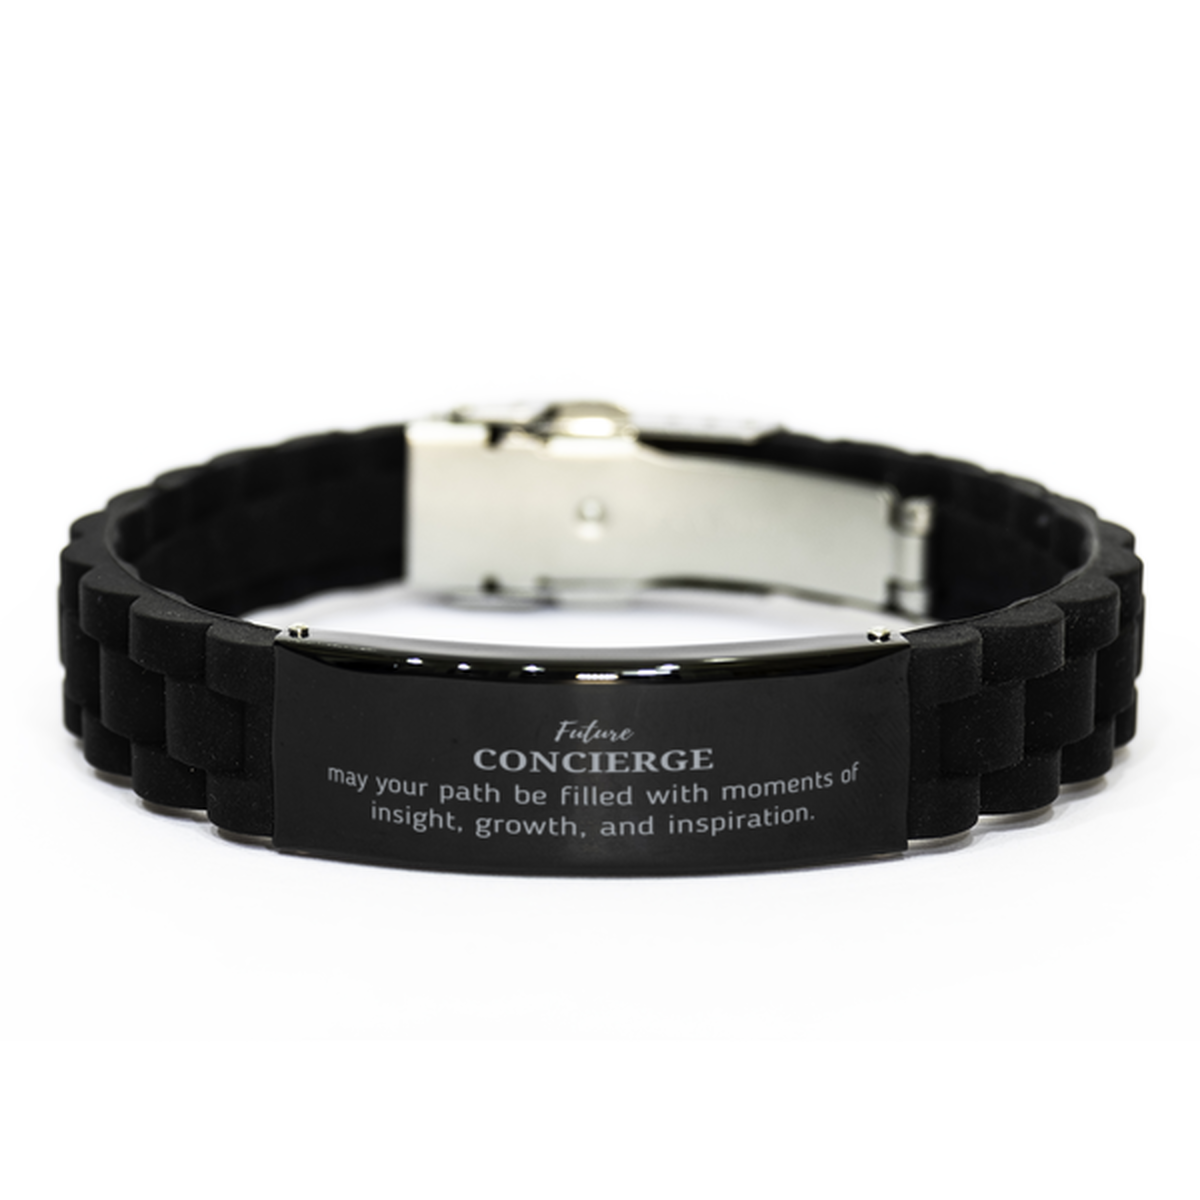 Future Concierge Gifts, May your path be filled with moments of insight, Graduation Gifts for New Concierge, Christmas Unique Black Glidelock Clasp Bracelet For Men, Women, Friends